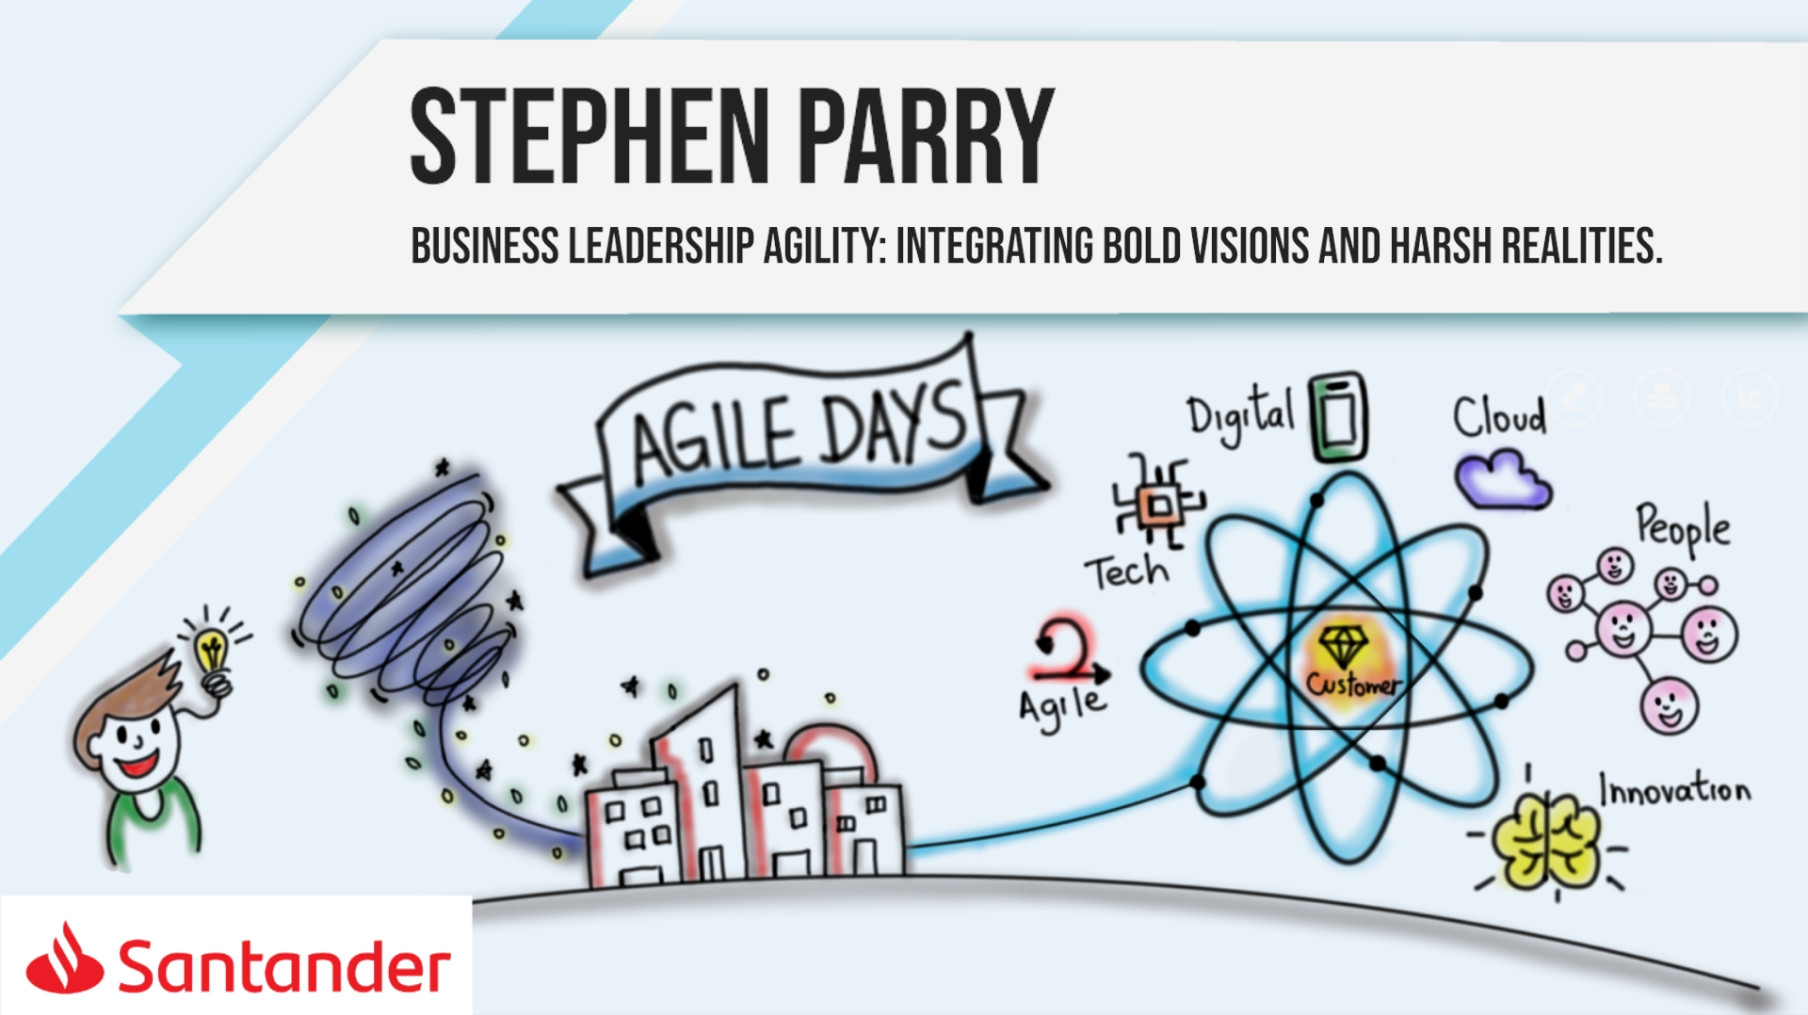 Business Leadership Agility: Integrating Bold Visions and Harsh Realities